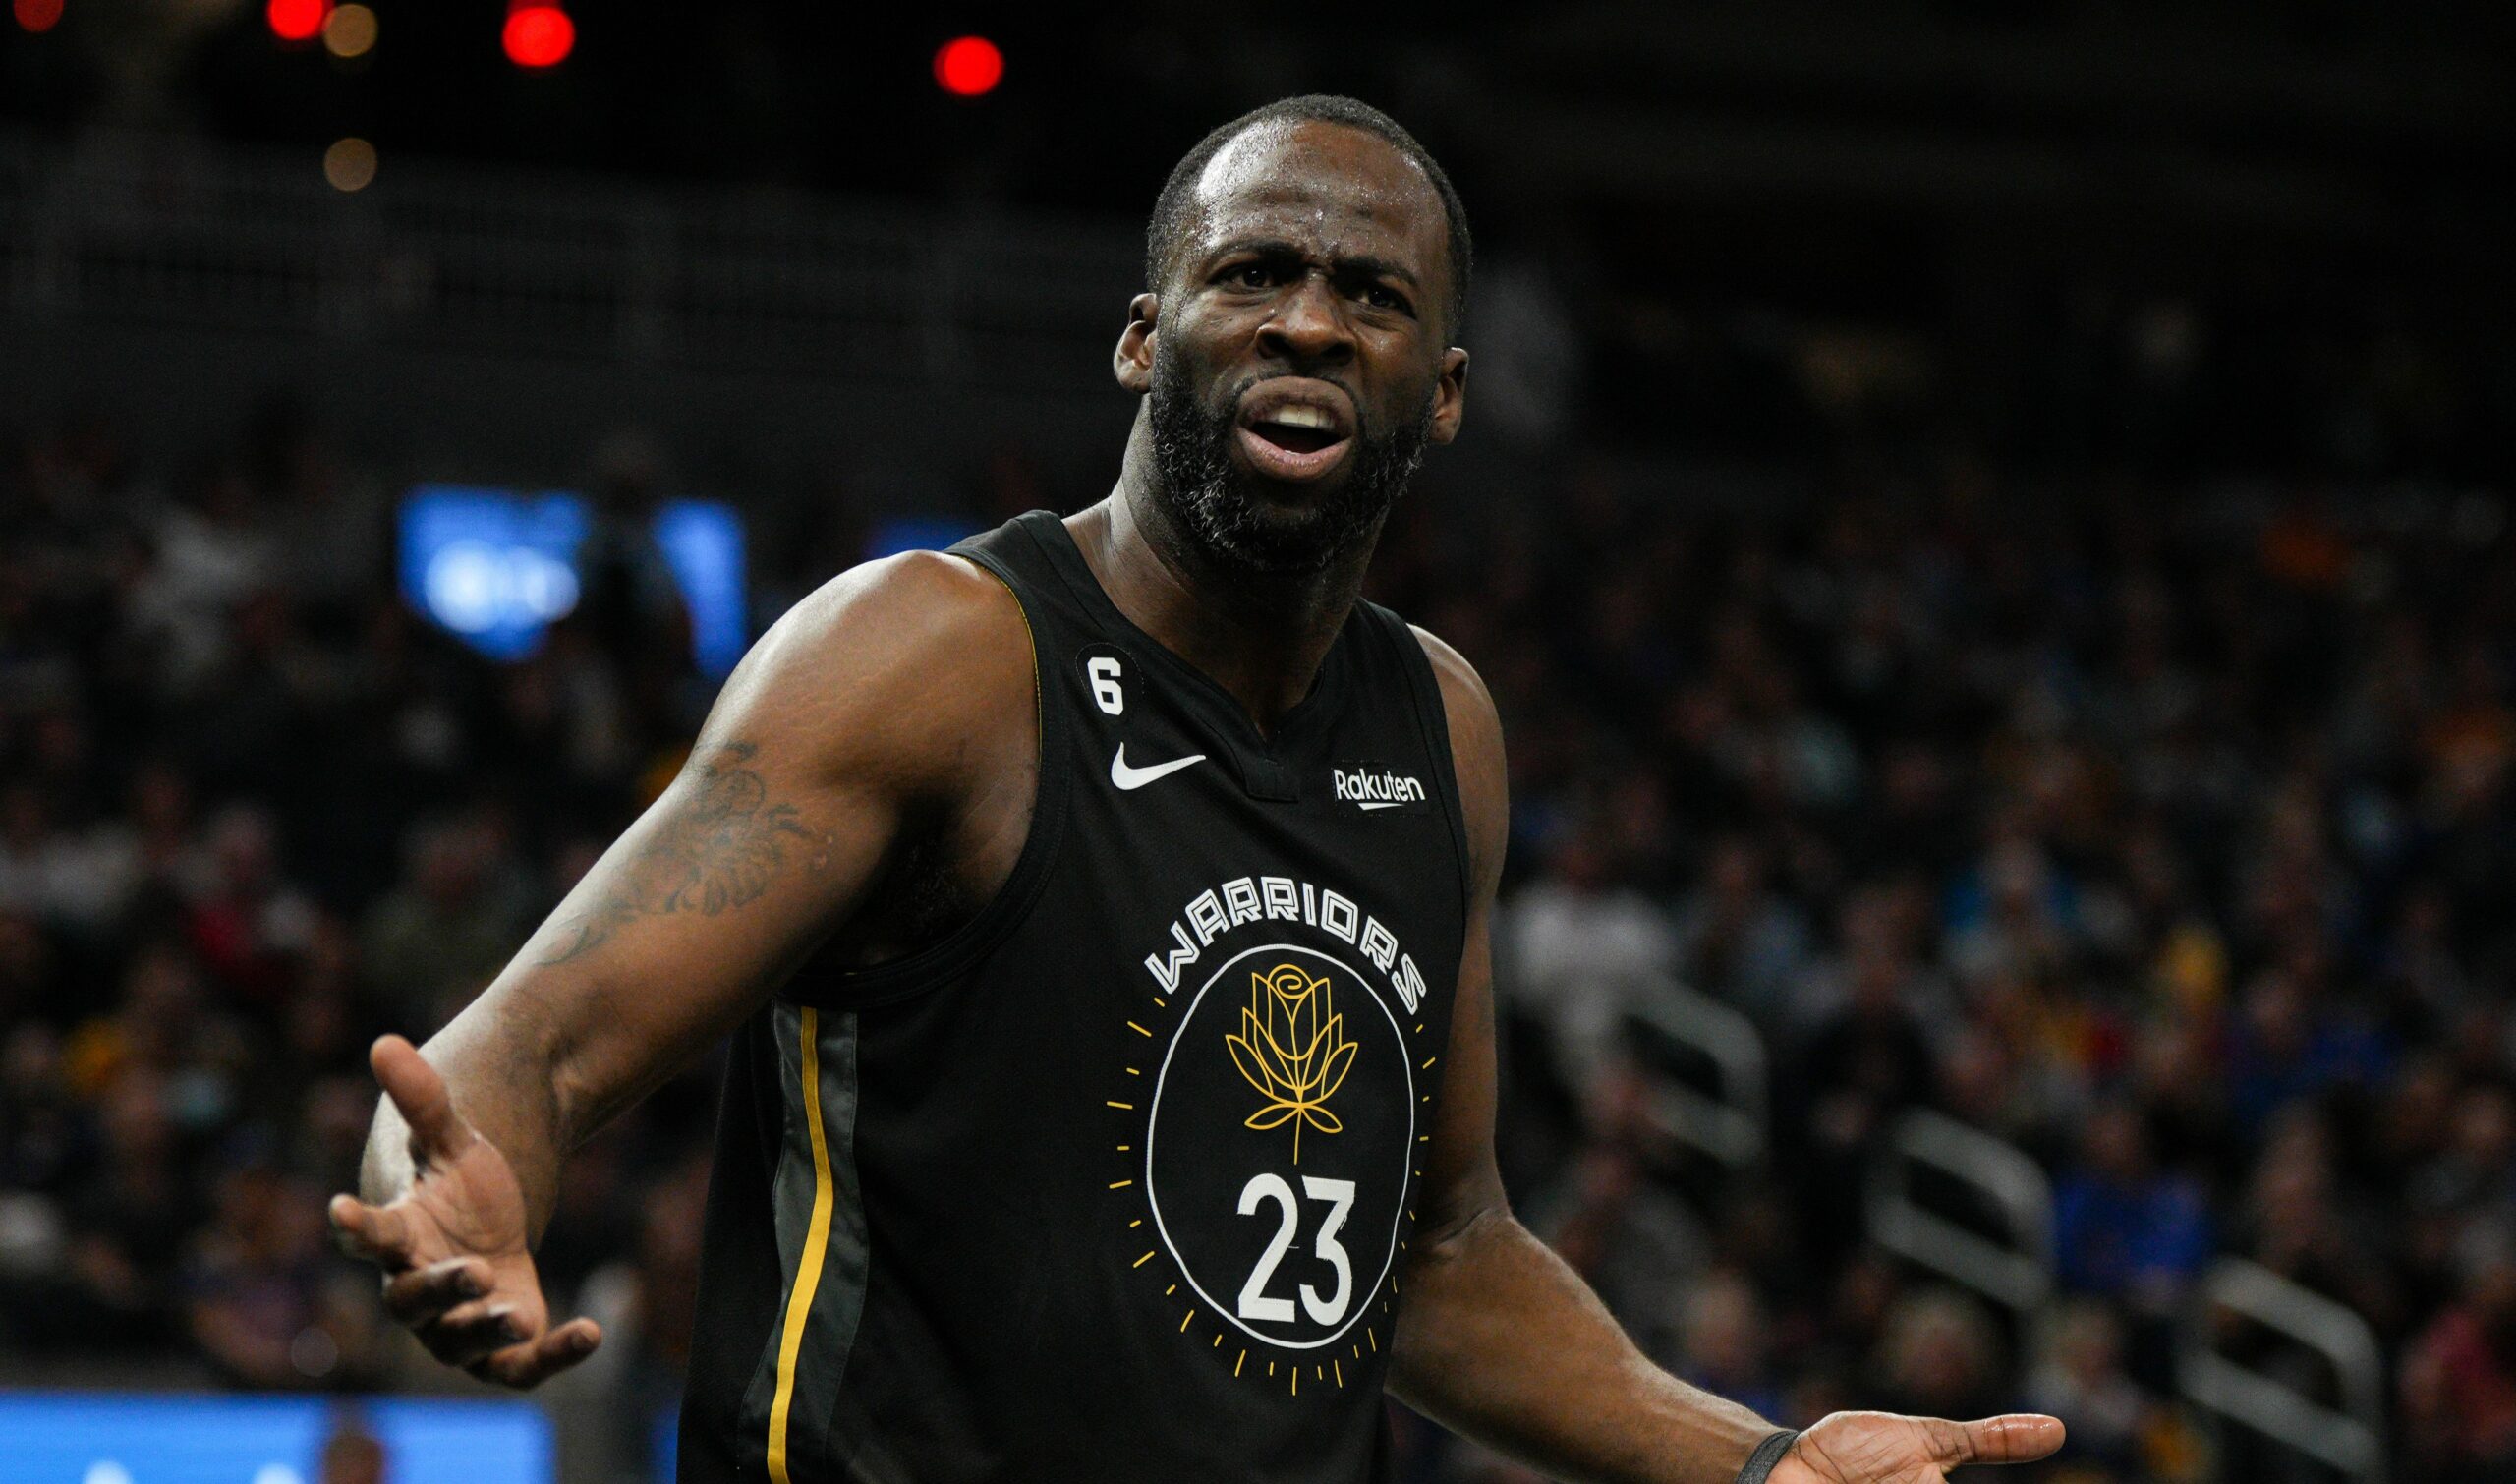 Mic’d-up video shows what Draymond Green said to Brandon Ingram during Warriors-Pelicans altercation